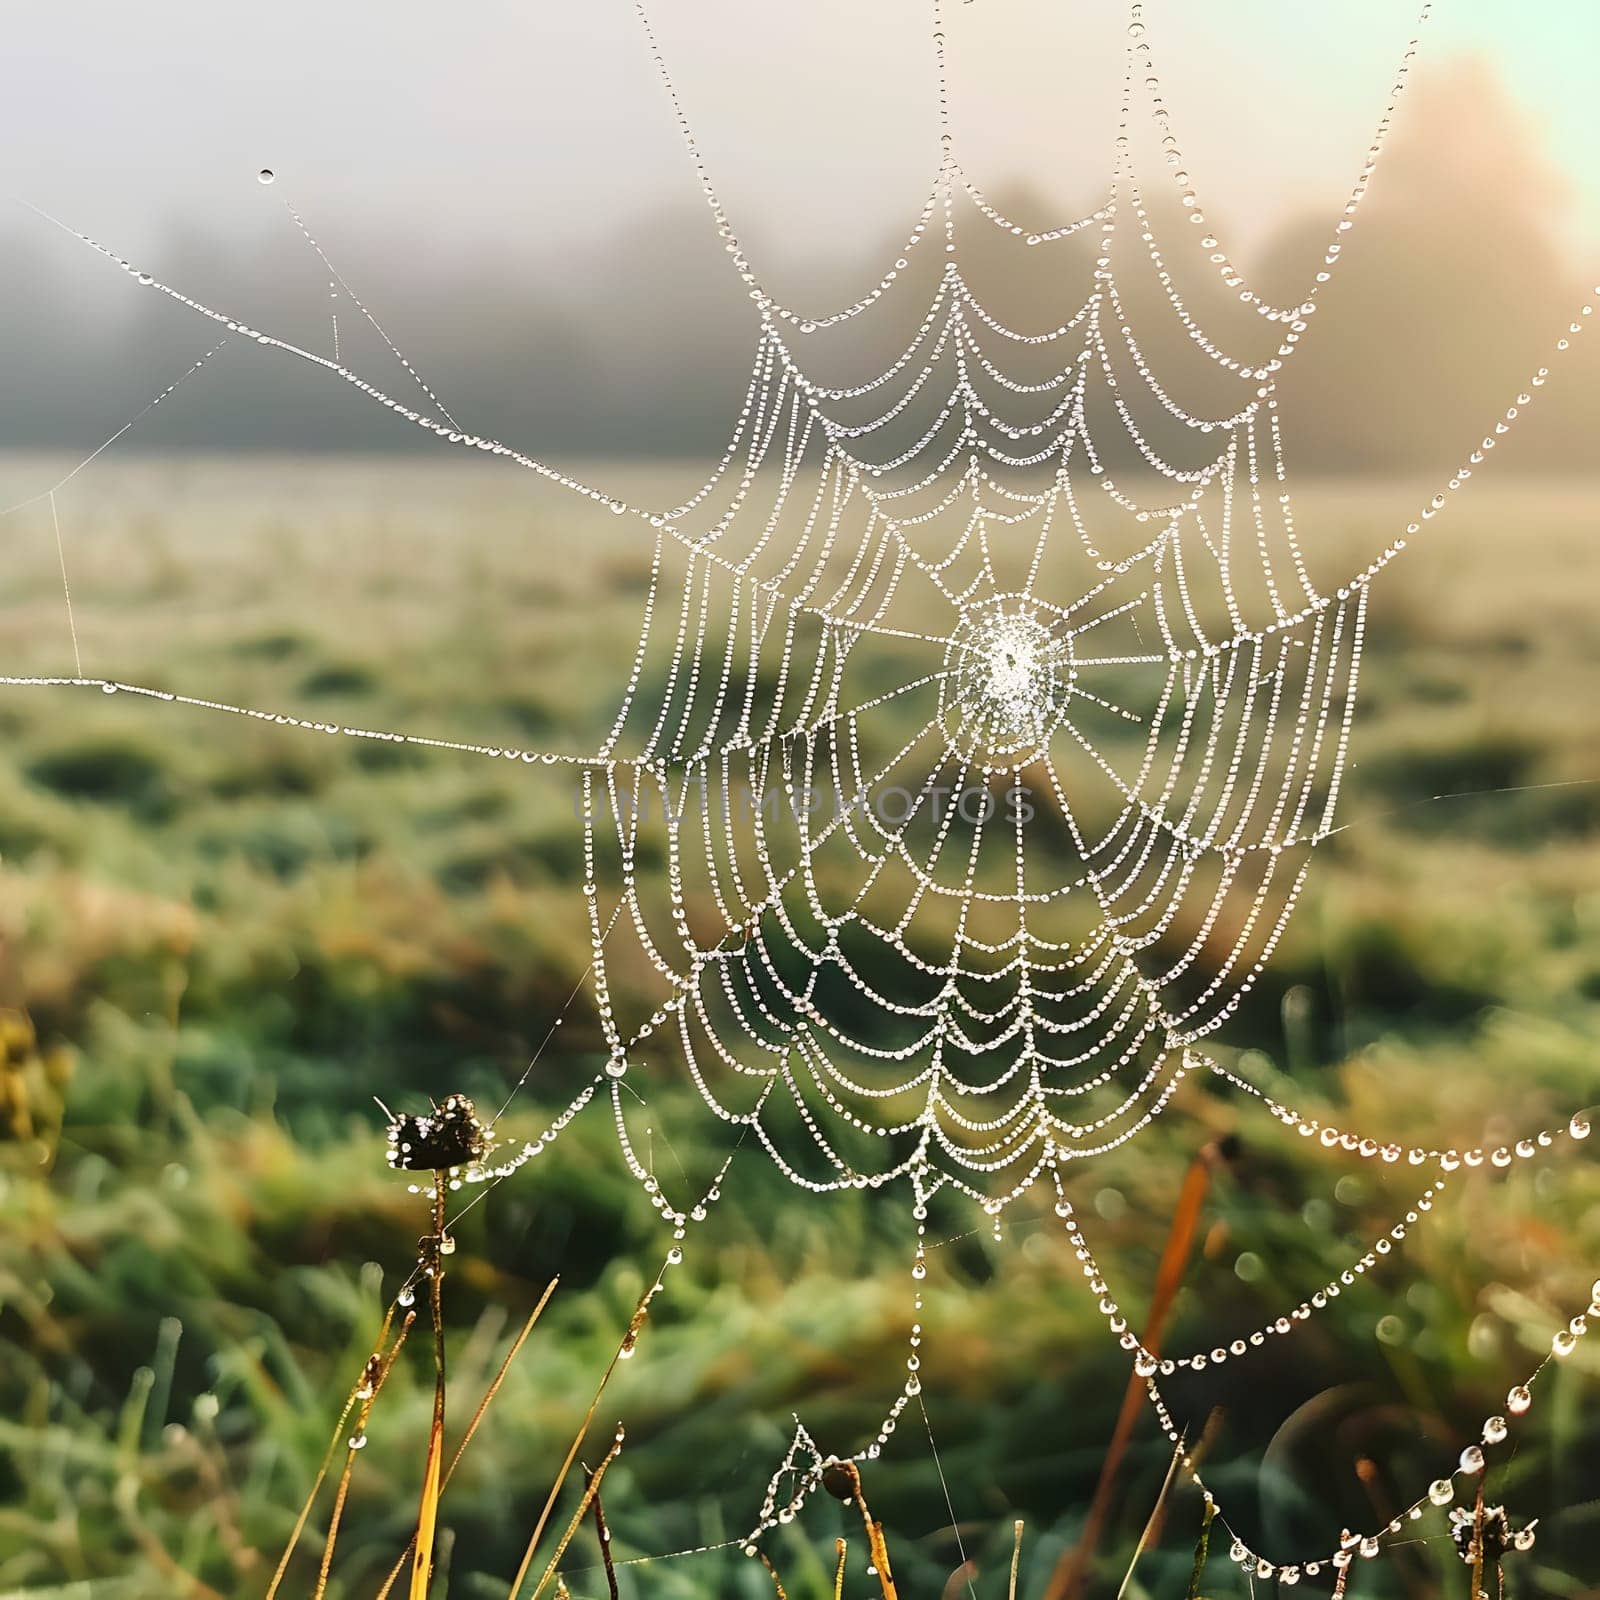 A closeup of a spider web with water drops on it in a field, showcasing the beauty of natural materials and the intricate art of macro photography in the terrestrial plant environment